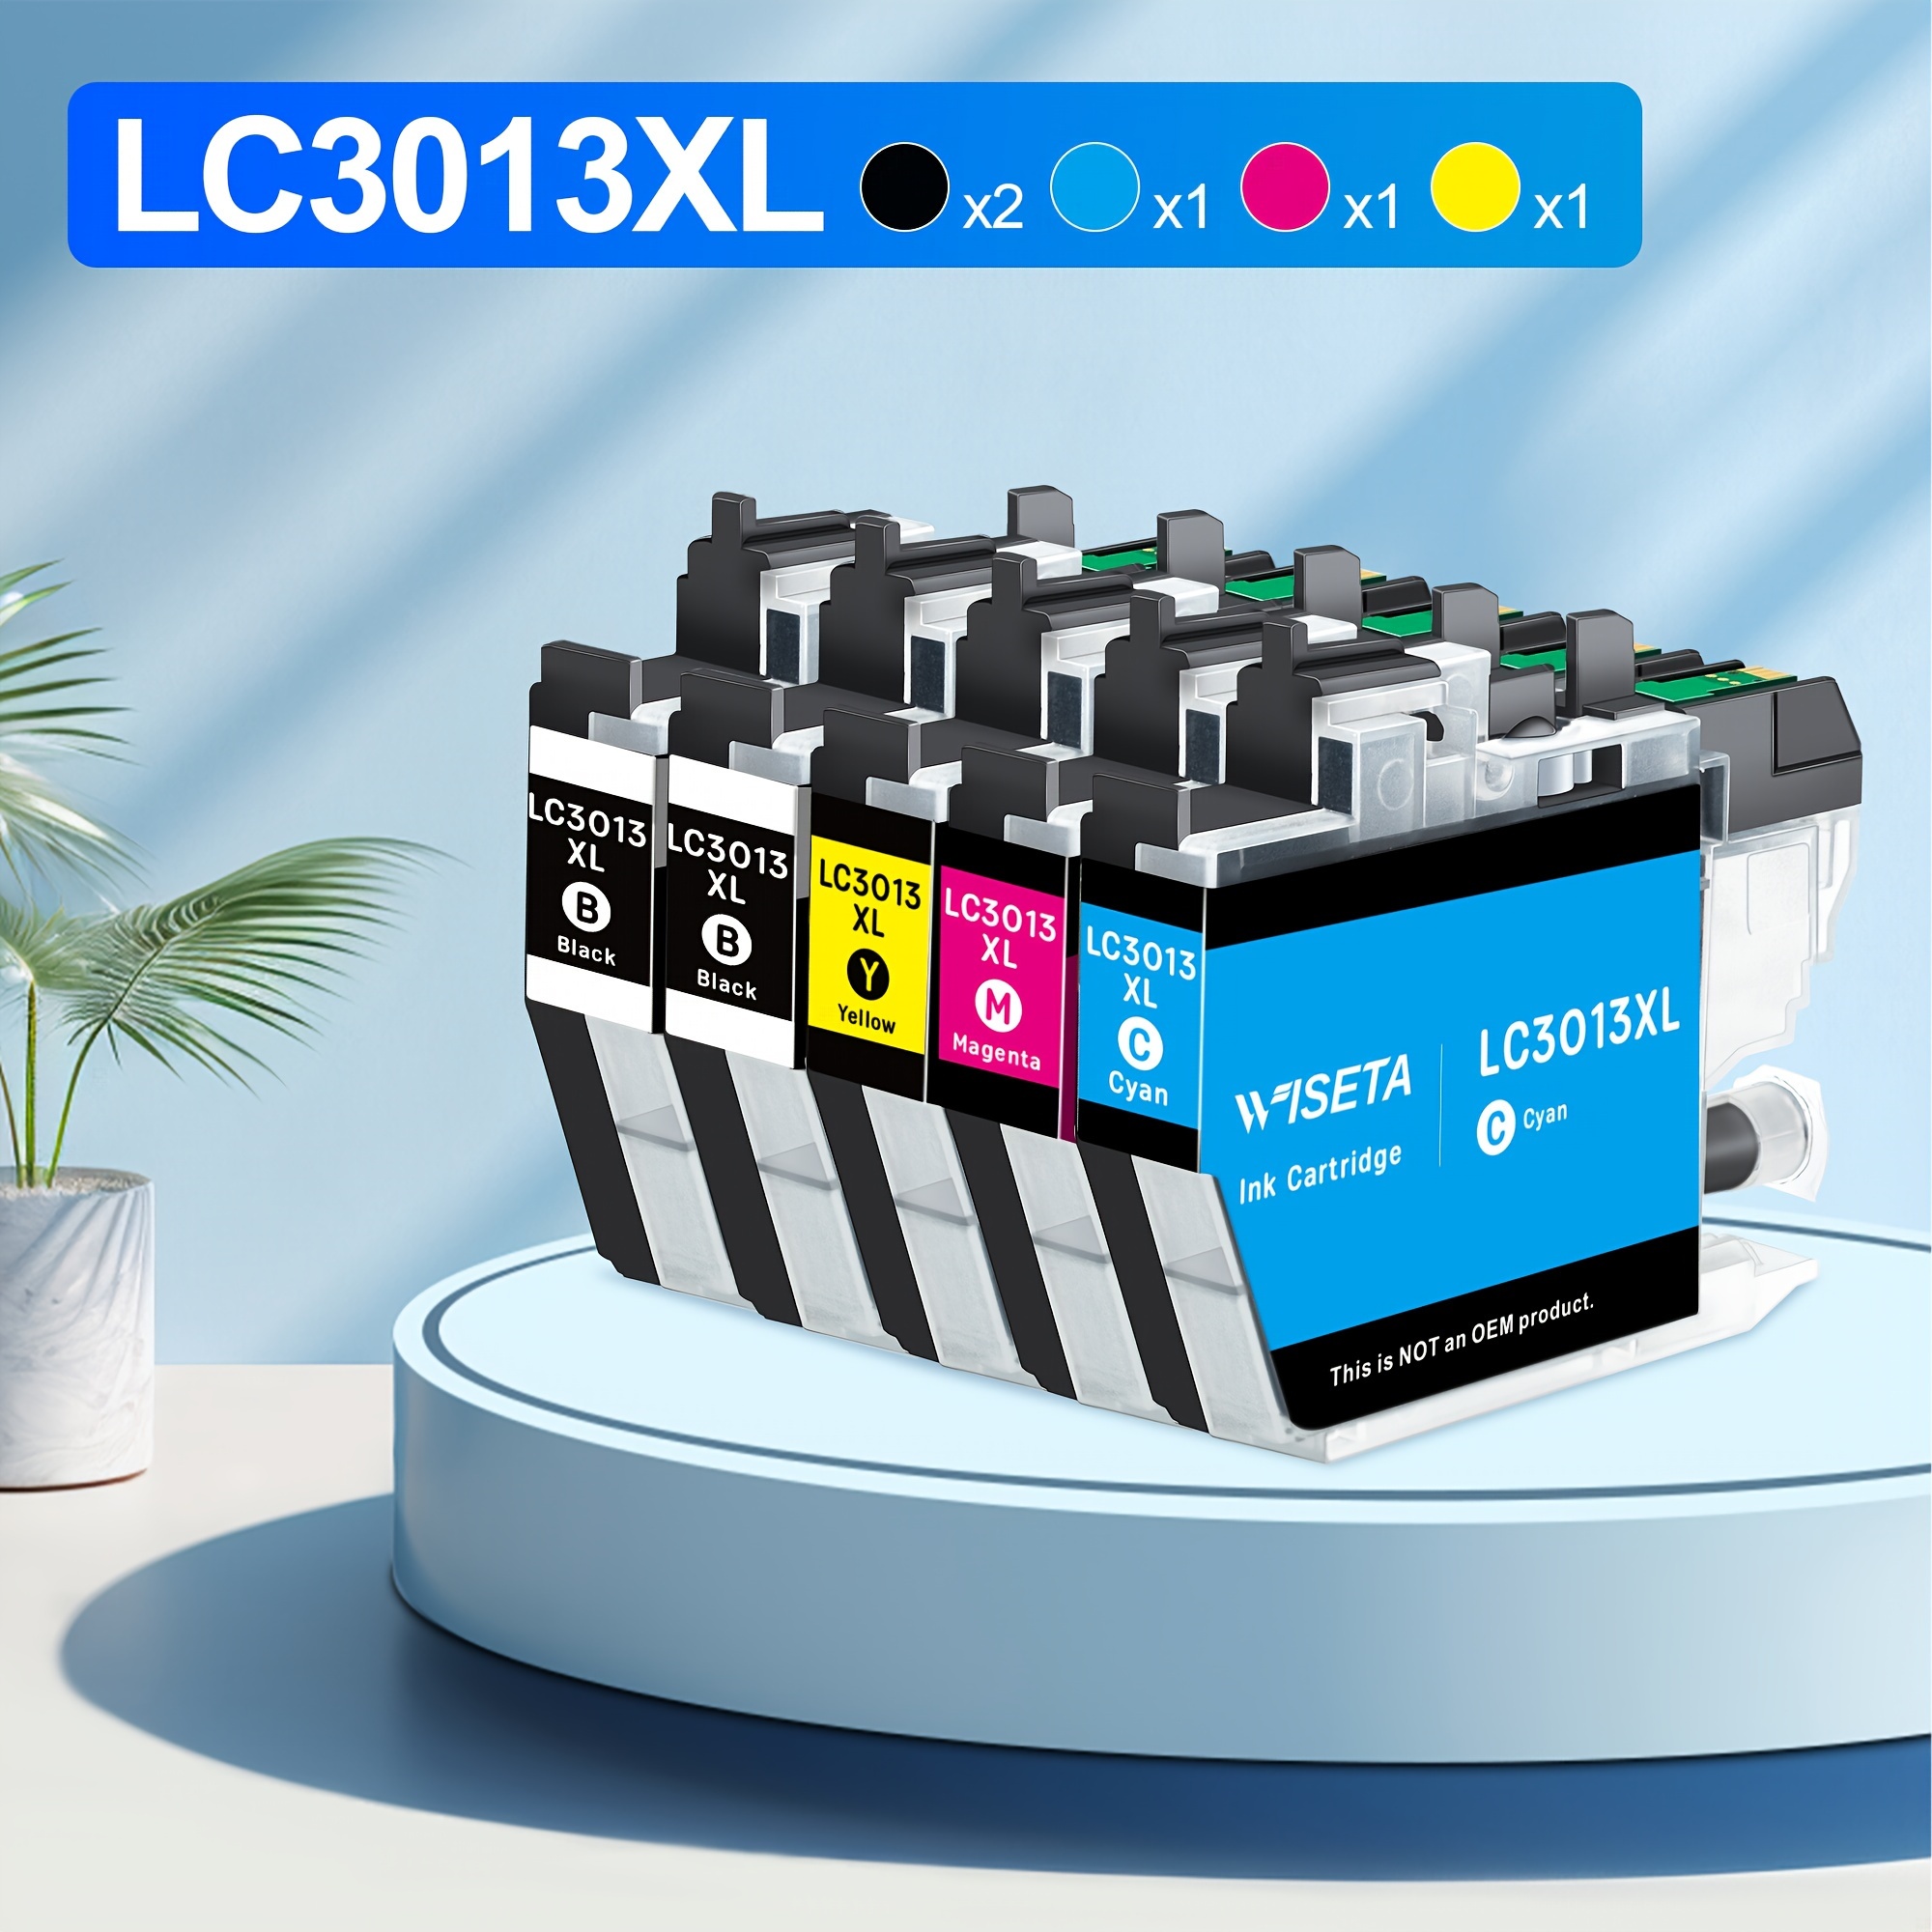 

5 Pack Lc3011 Lc3013 Ink Cartridges Replacement For Brother Lc3013 Lc3013xl To Work With Brother Mfc-j690dw Mfc-j895dw Mfc-j491dw Mfc-j497dw Printer (2 Black, 1 Cyan, 1 Magenta, 1 Yellow)